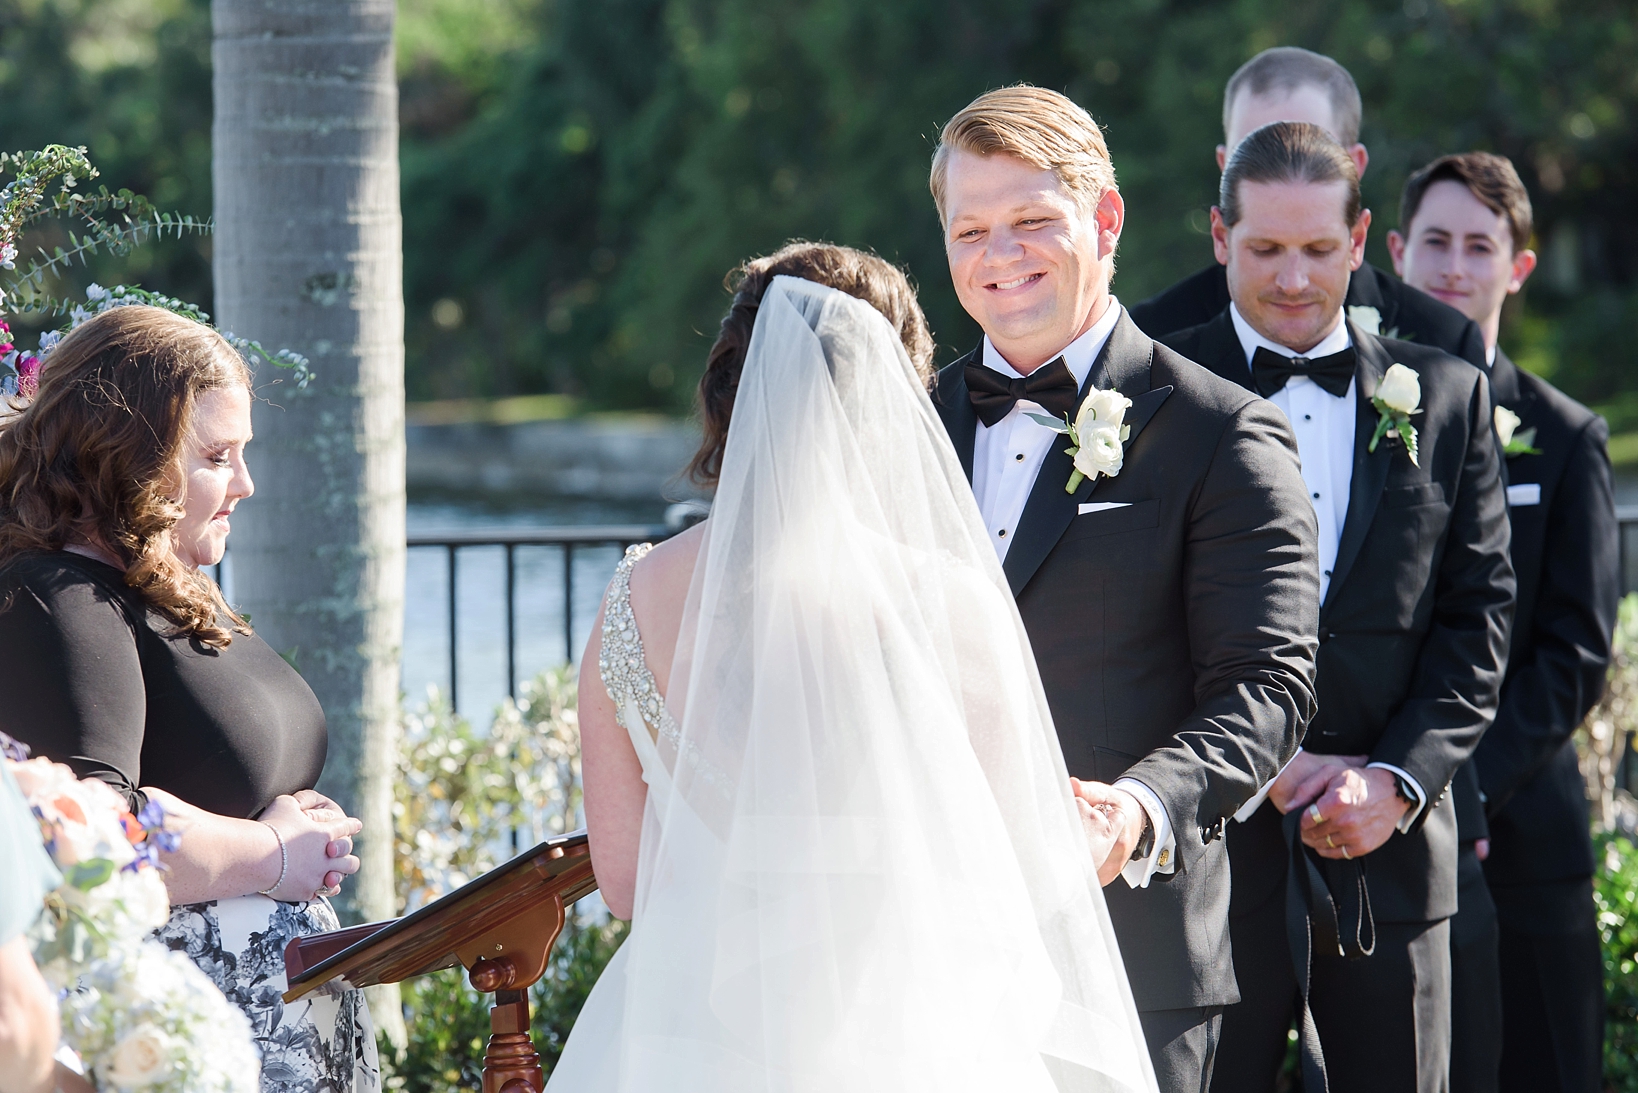 Groom smiling as his Bride reads her vows to him during the ceremony by Sarah & Ben Photography